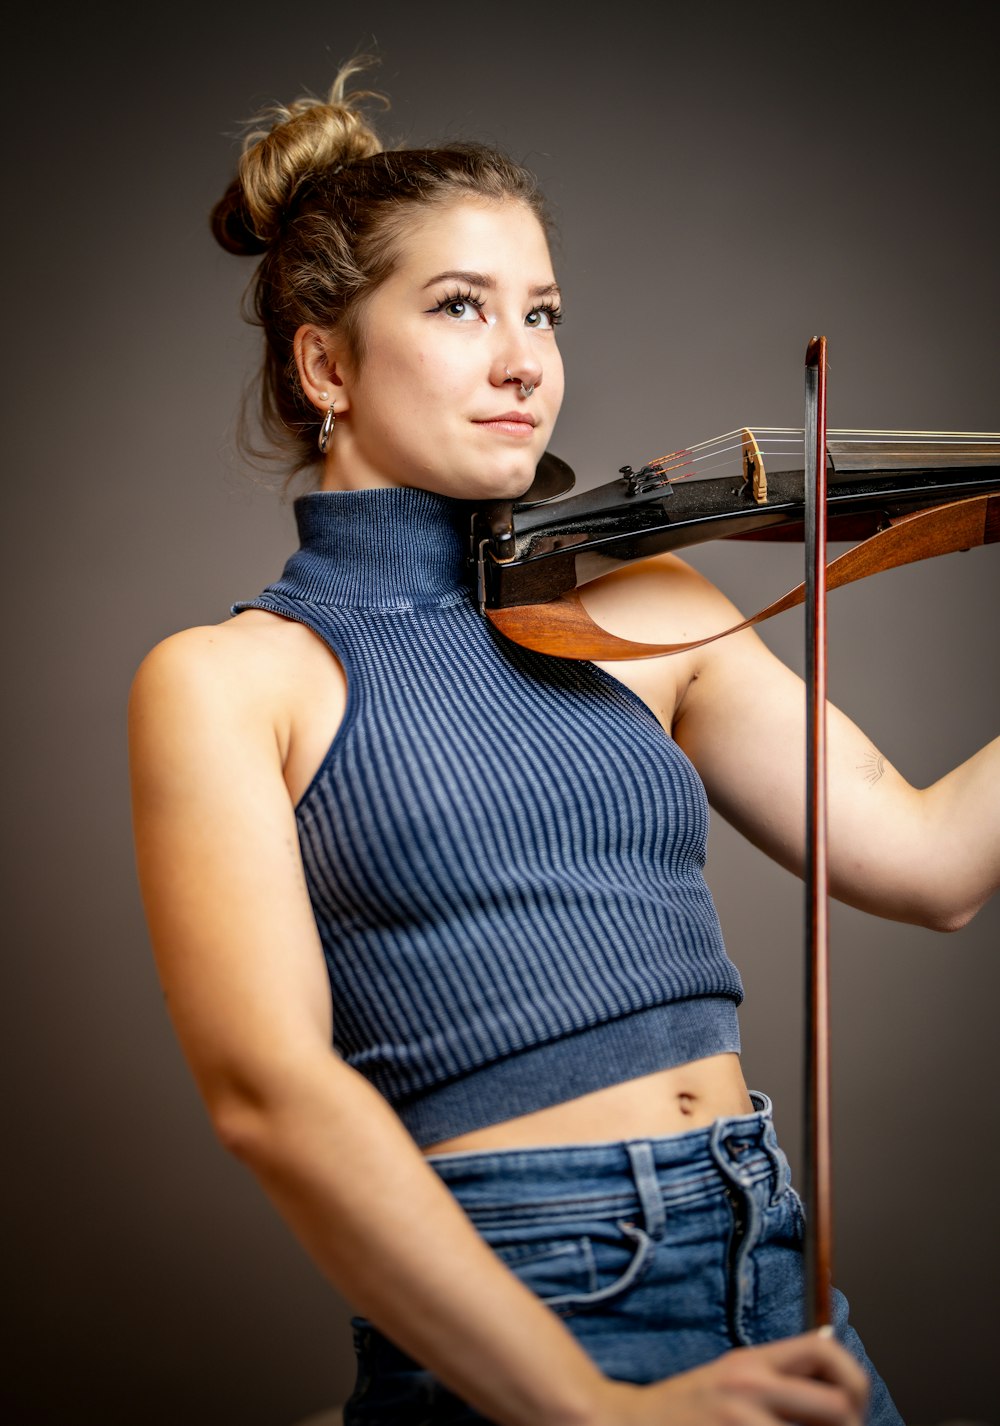 a woman is holding a violin and posing for a picture